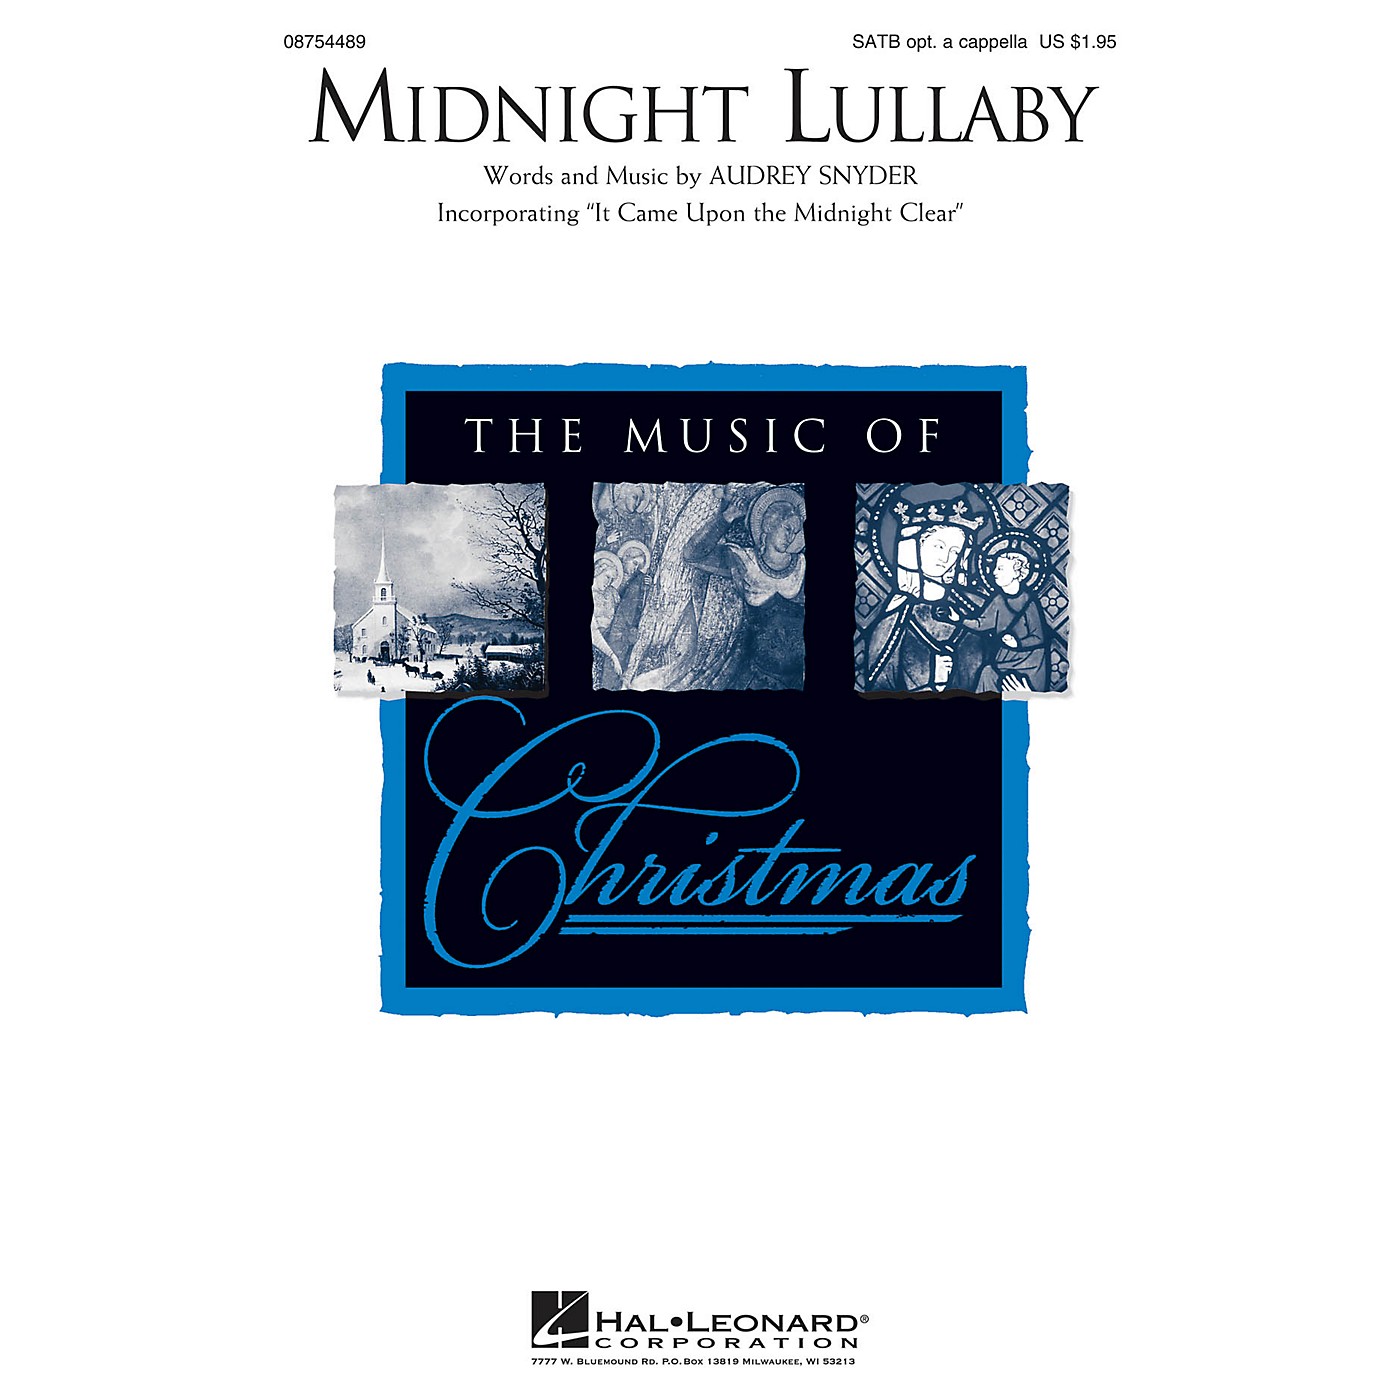 Hal Leonard Midnight Lullaby (Incorporating It Came Upon the Midnight Clear) SATB arranged by Audrey Snyder thumbnail